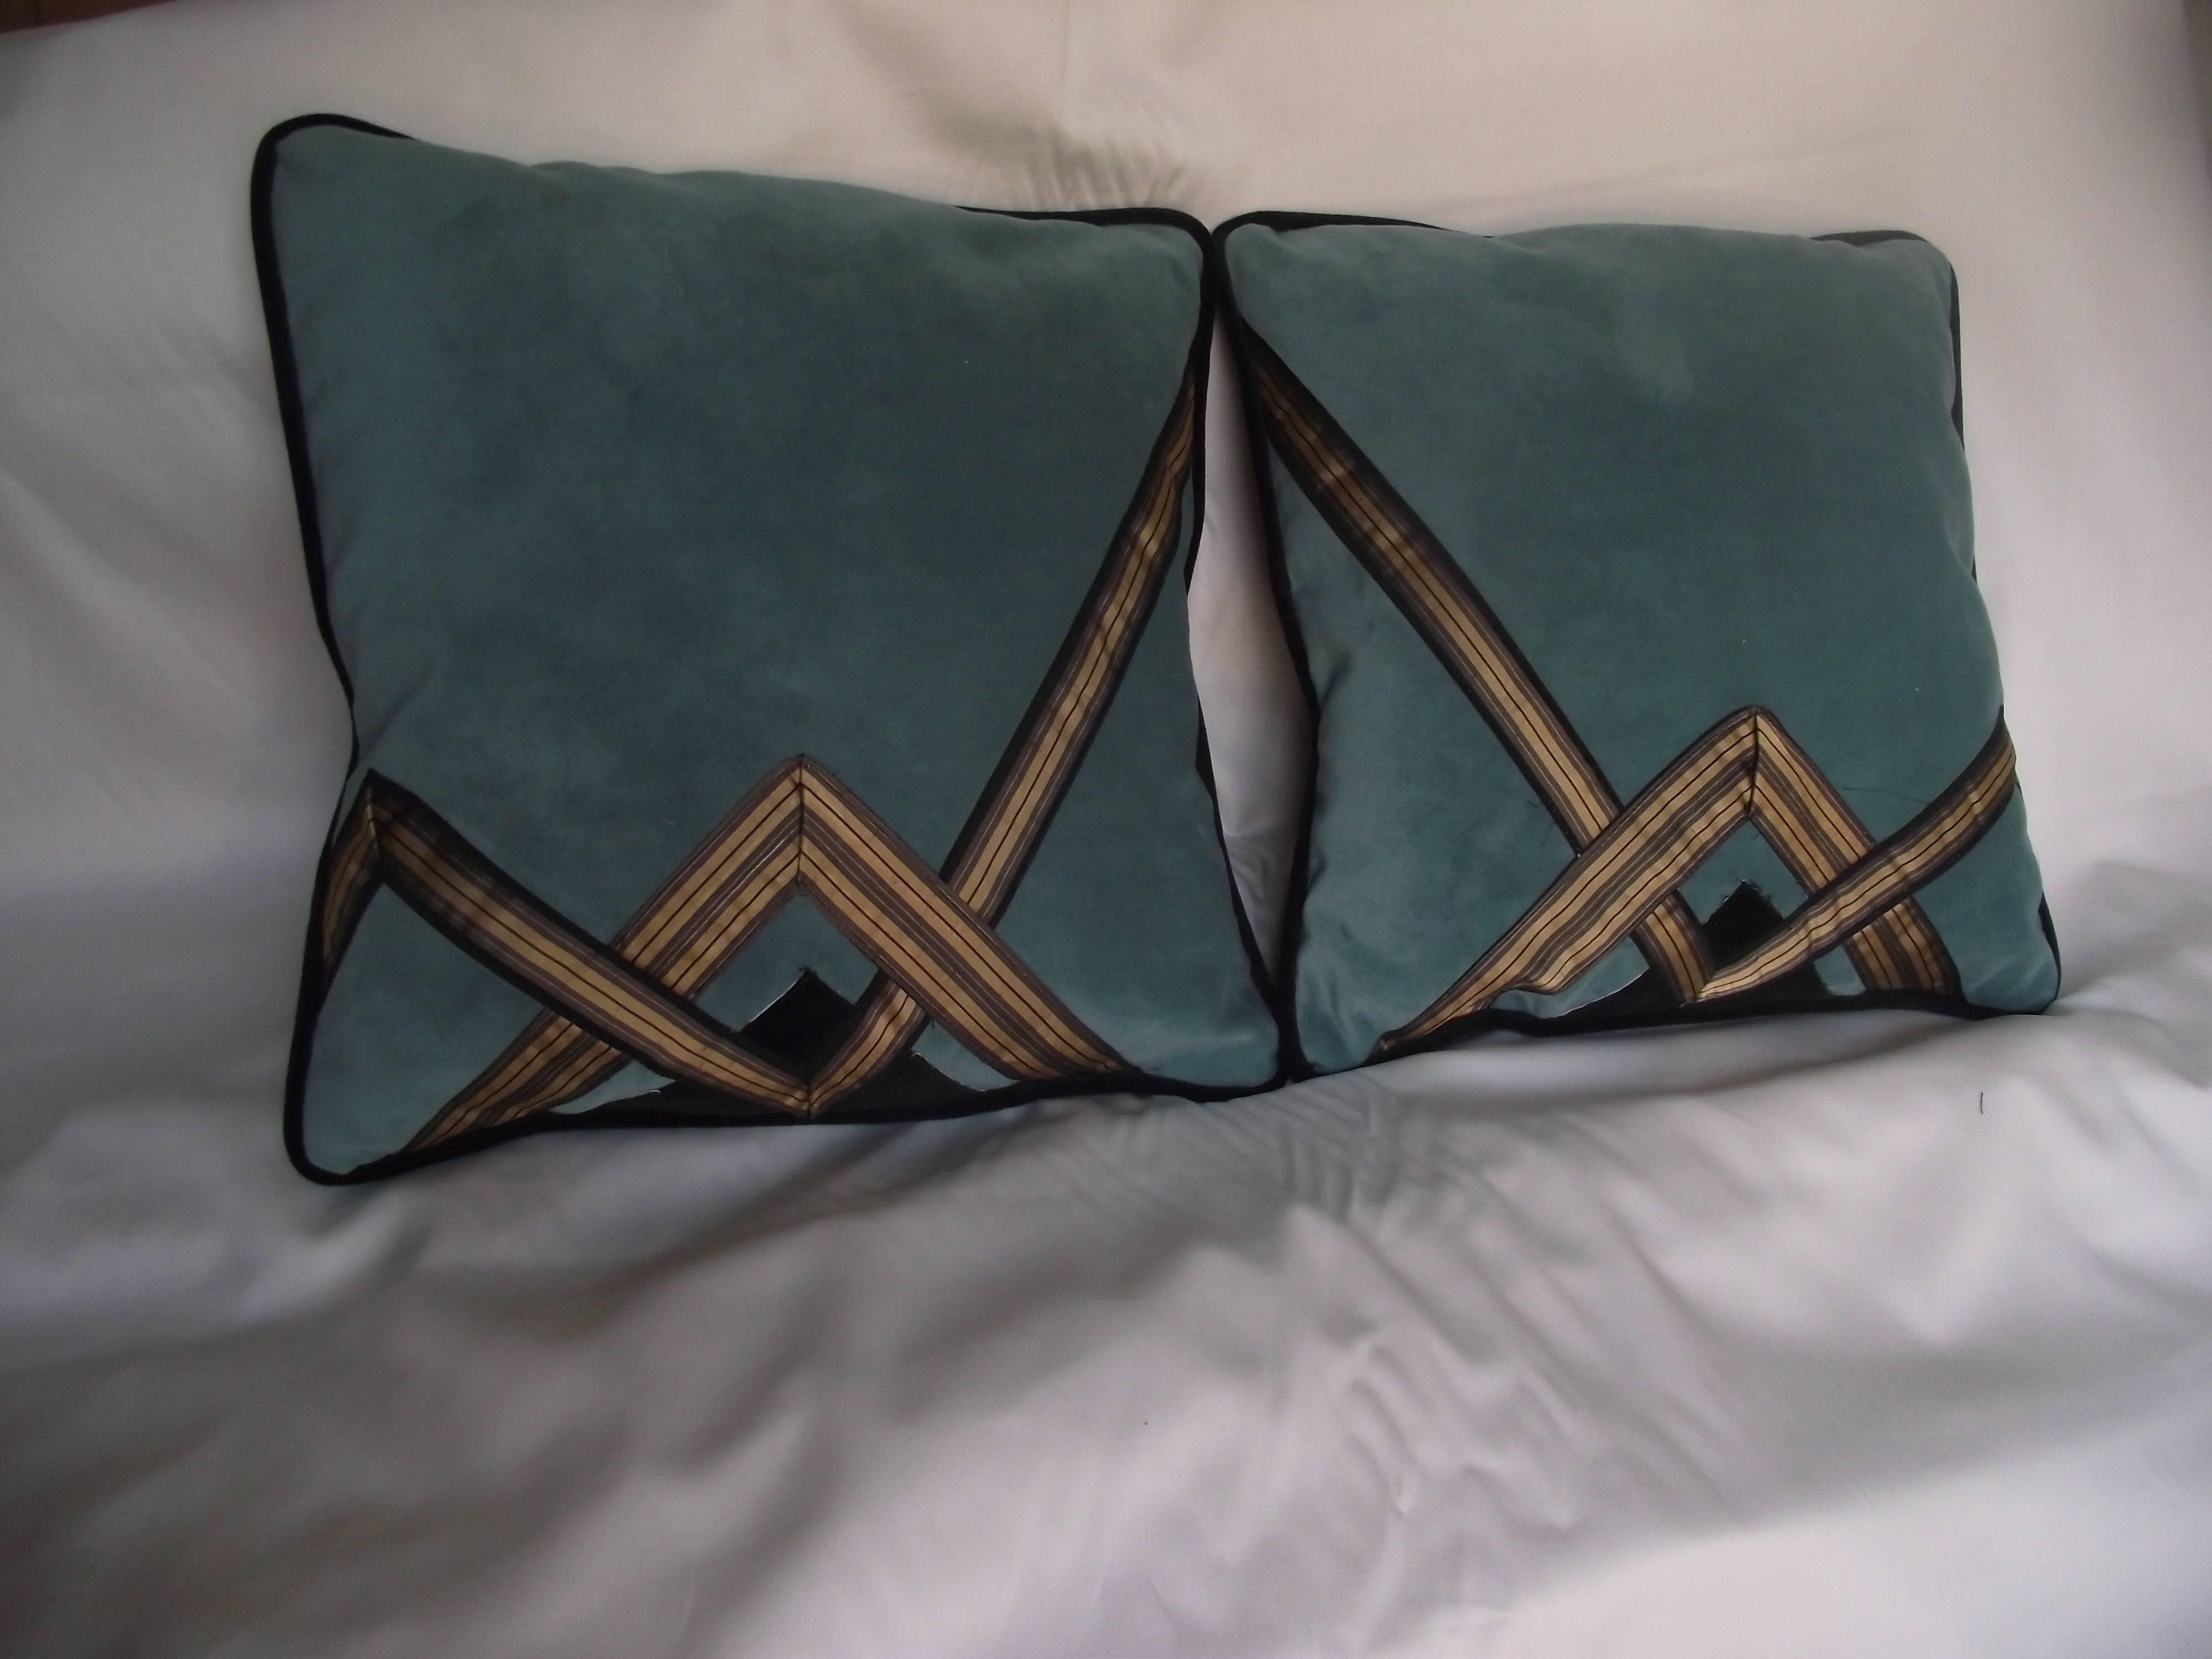 This pair of signed velvet pillows features an original deco style design by Gantt Design studio. As you can see in the pictures when the pillows are placed side by side the design continues from one pillow through the other.

The opposite side of